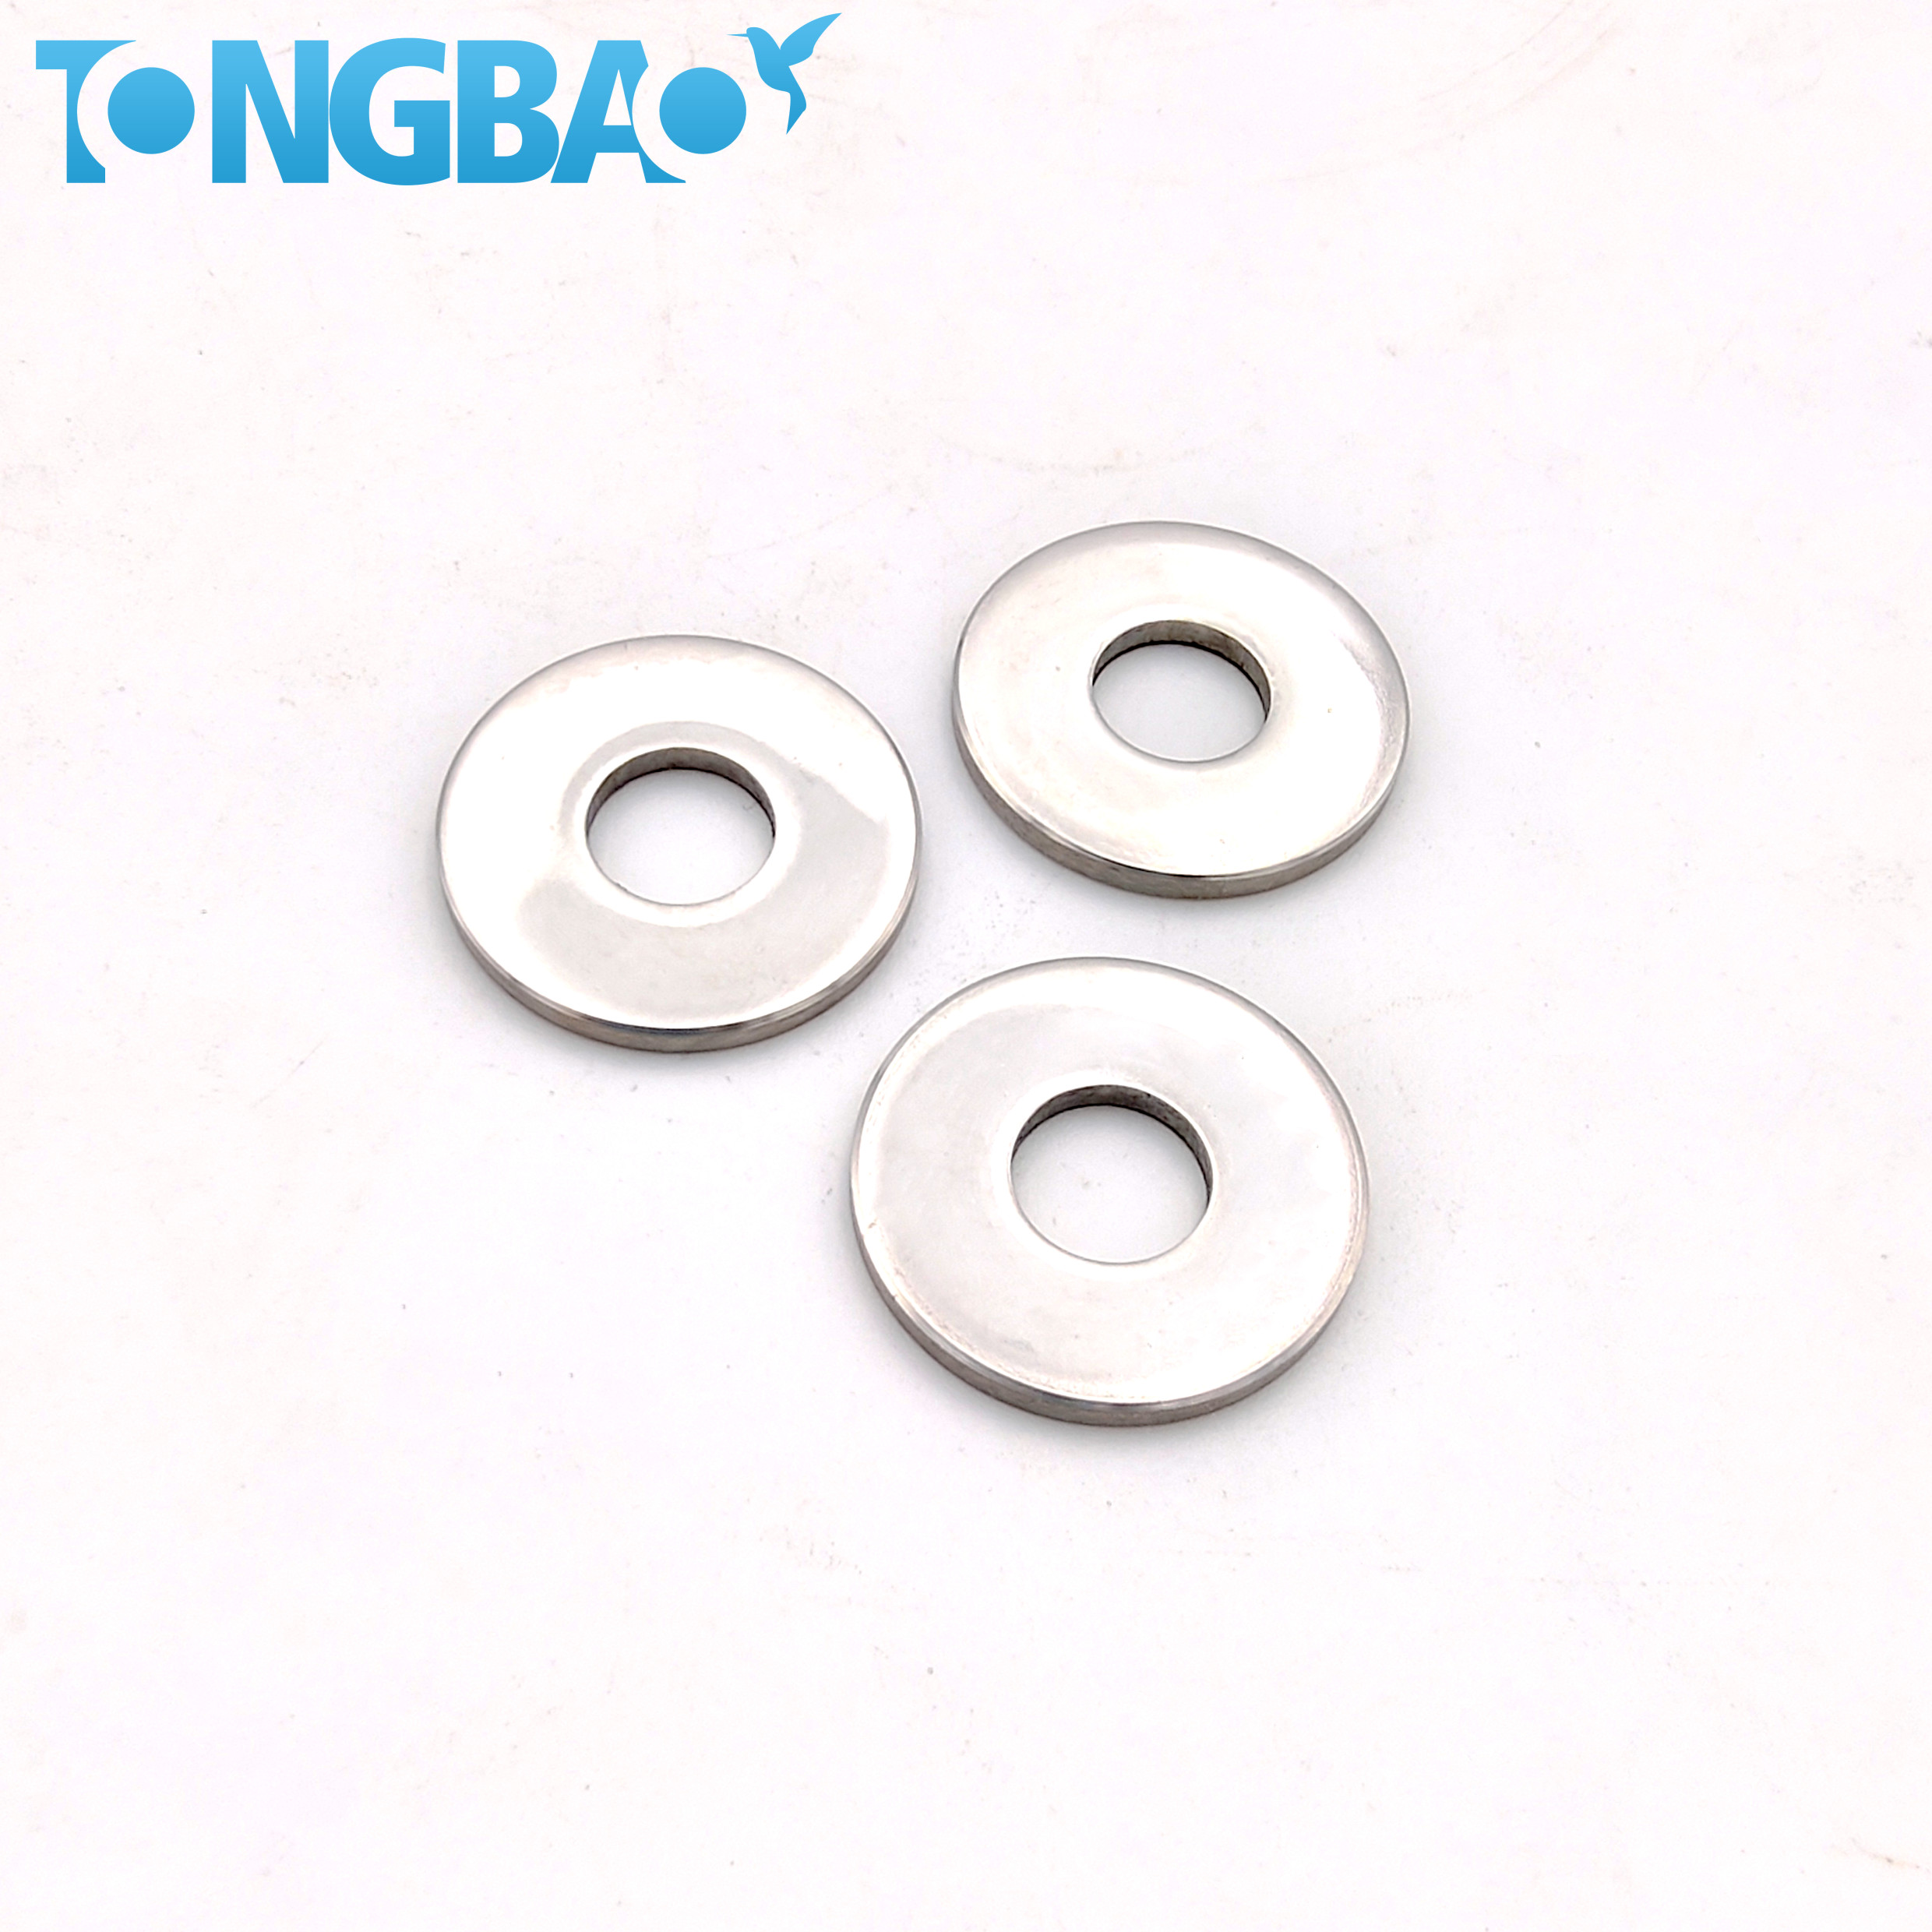 Stainless Steel Standoff Spacer/Washer